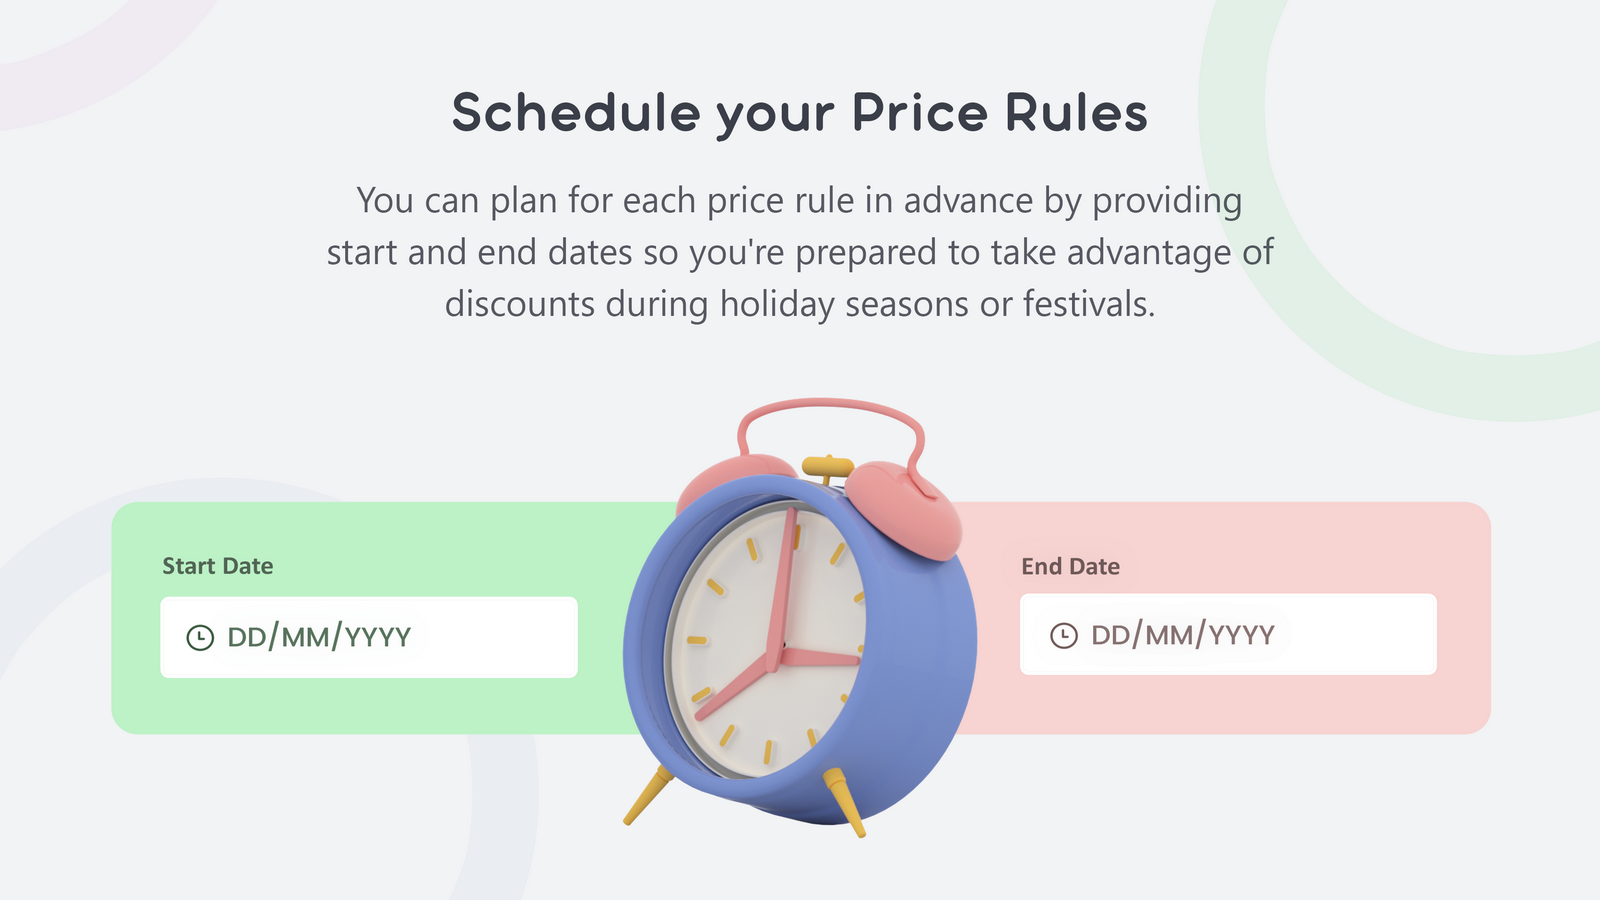 Schedule your Price Rules